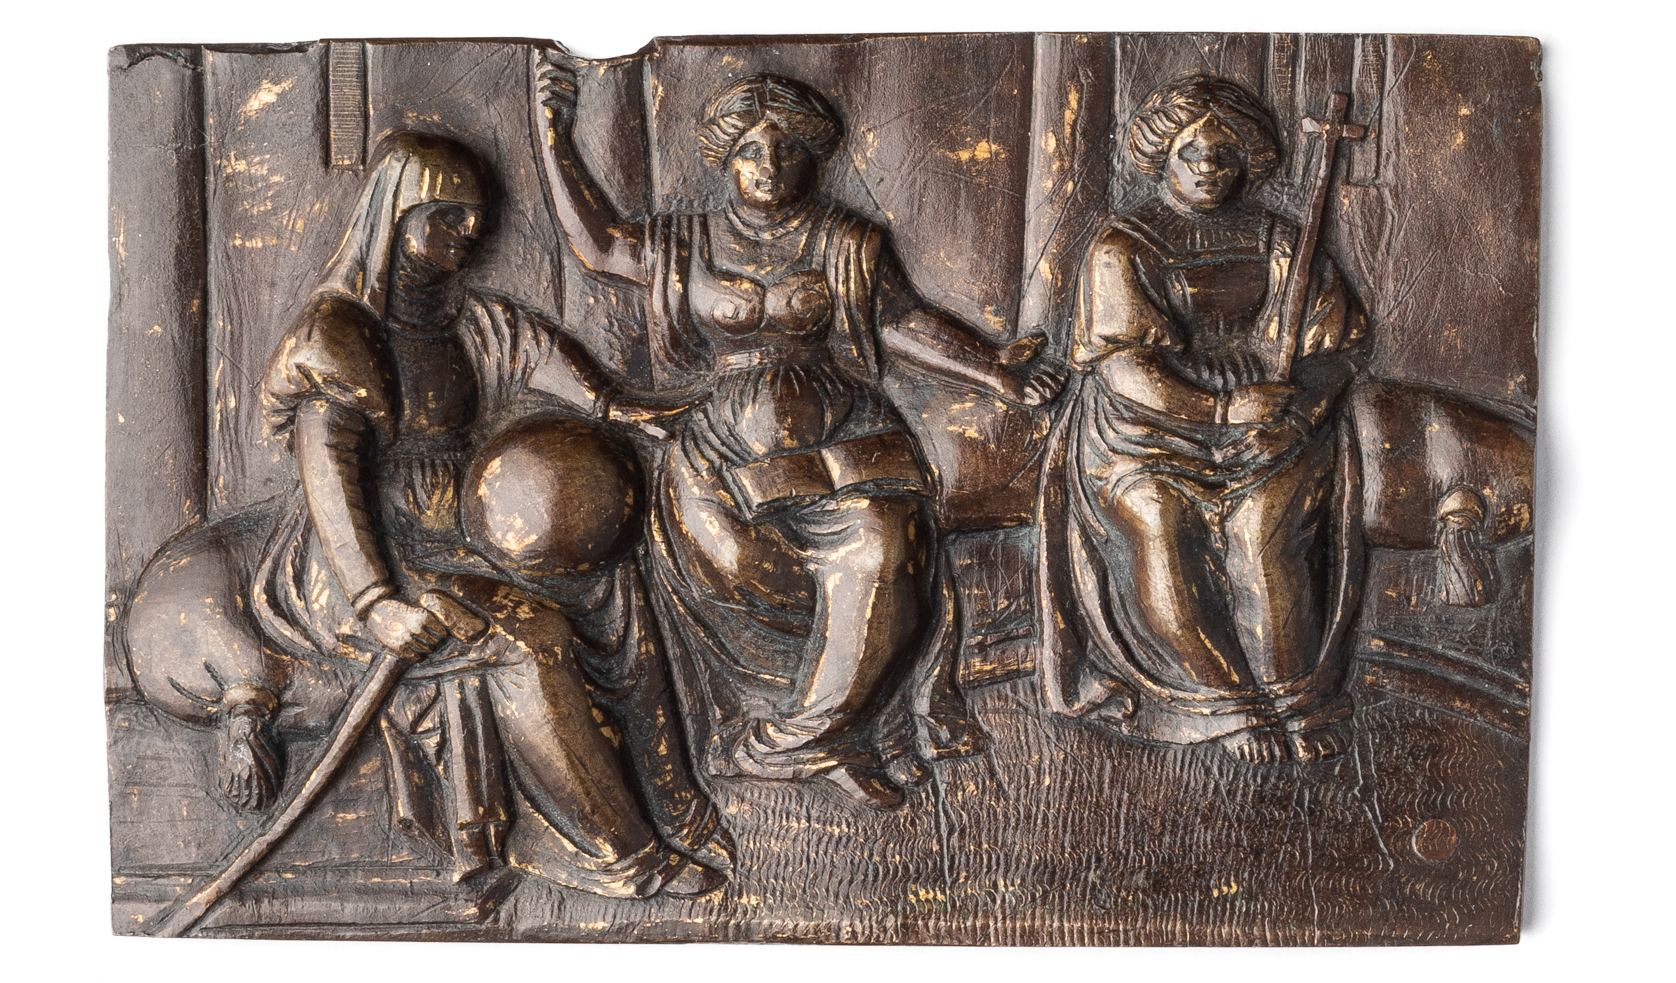 □ A BRONZE PLAQUETTE OF THREE SEATED FEMALE ALLEGORICAL FIGURES, NORTH ITALIAN, PROBABLY EARLY 16TH